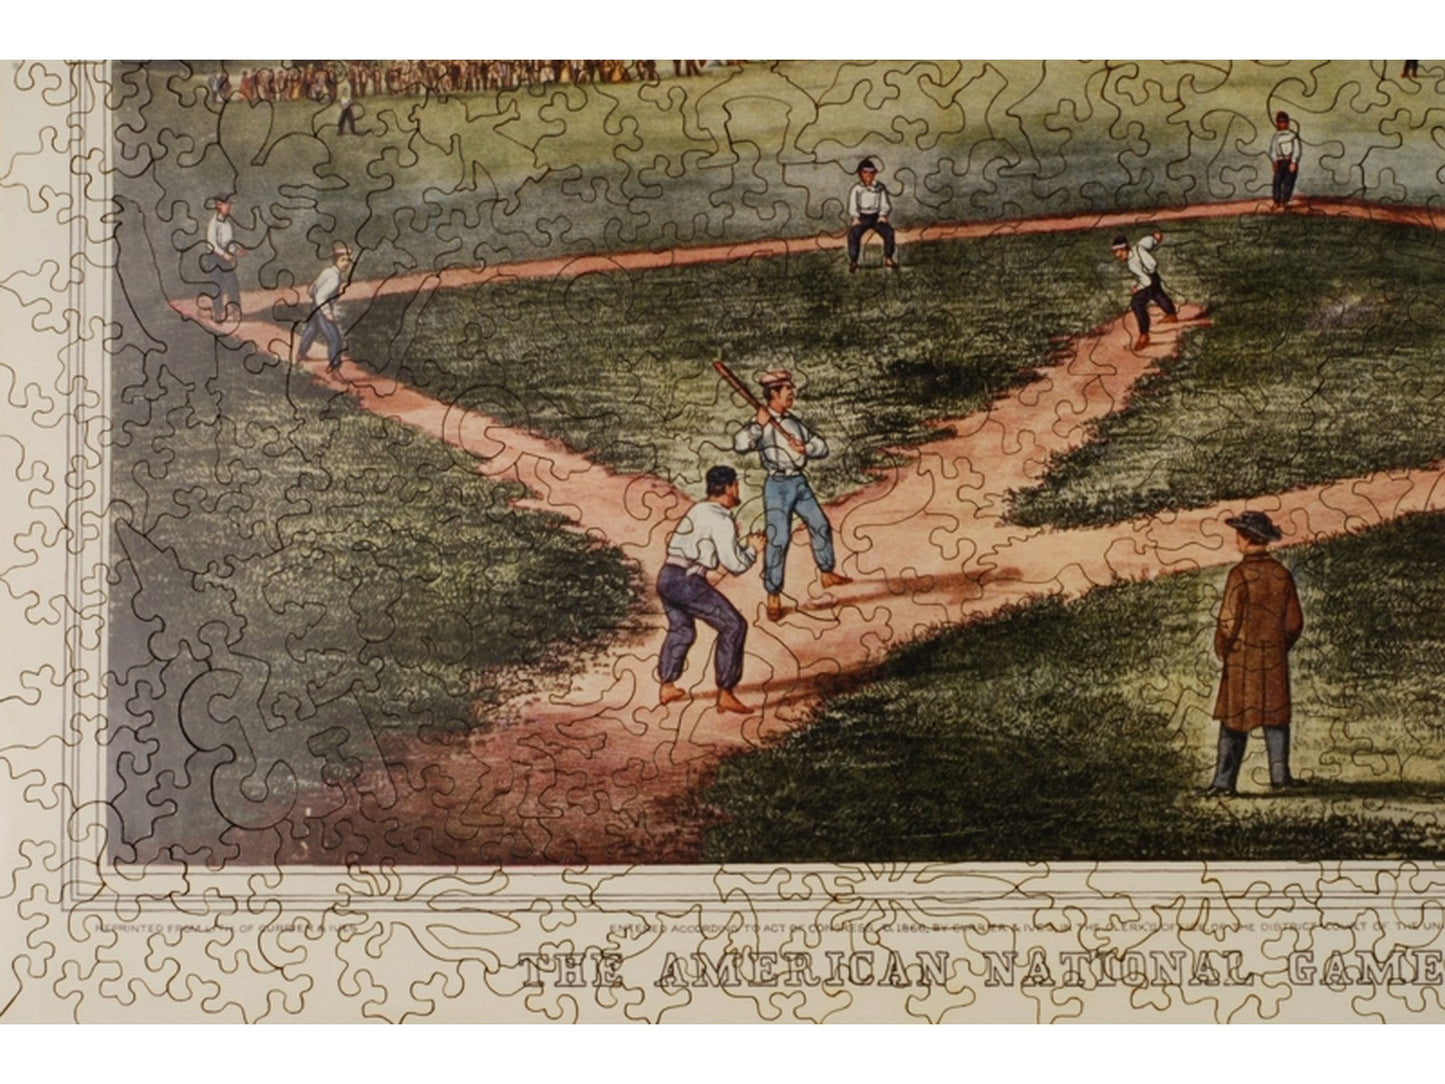 A closeup of the front of the puzzle, The American National Game of Baseball.